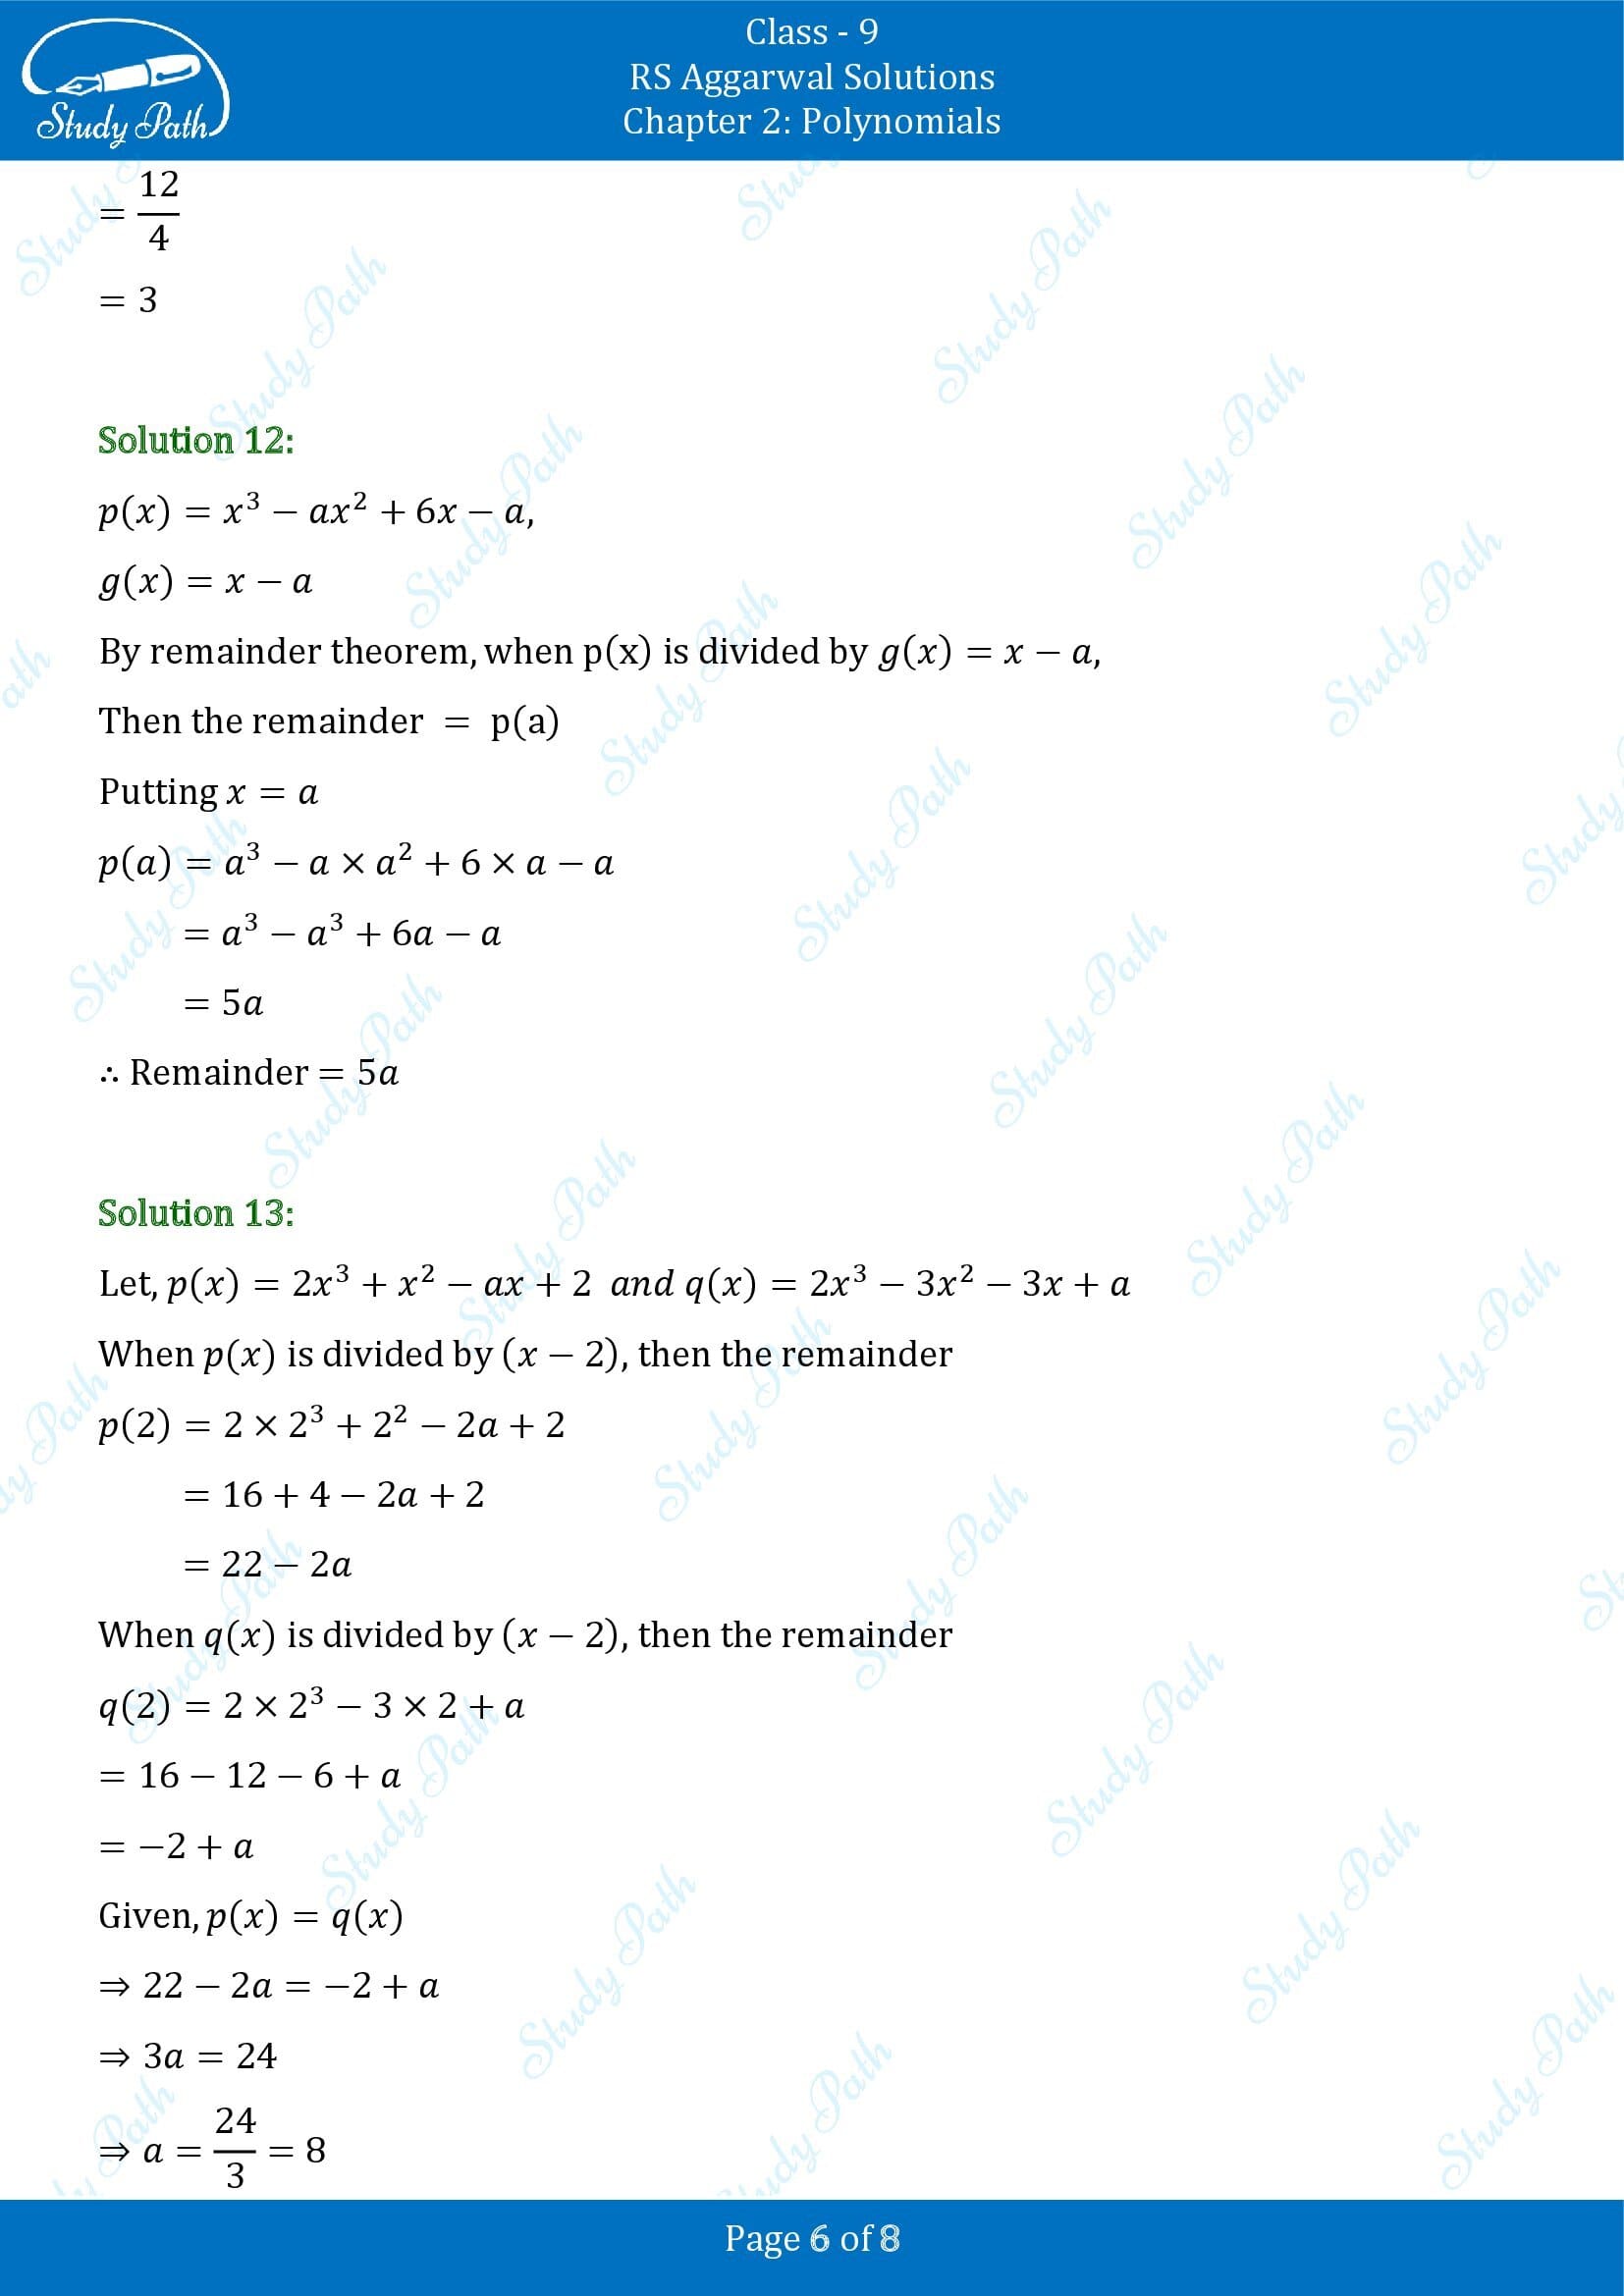 RS Aggarwal Solutions Class 9 Chapter 2 Polynomials Exercise 2C 00006